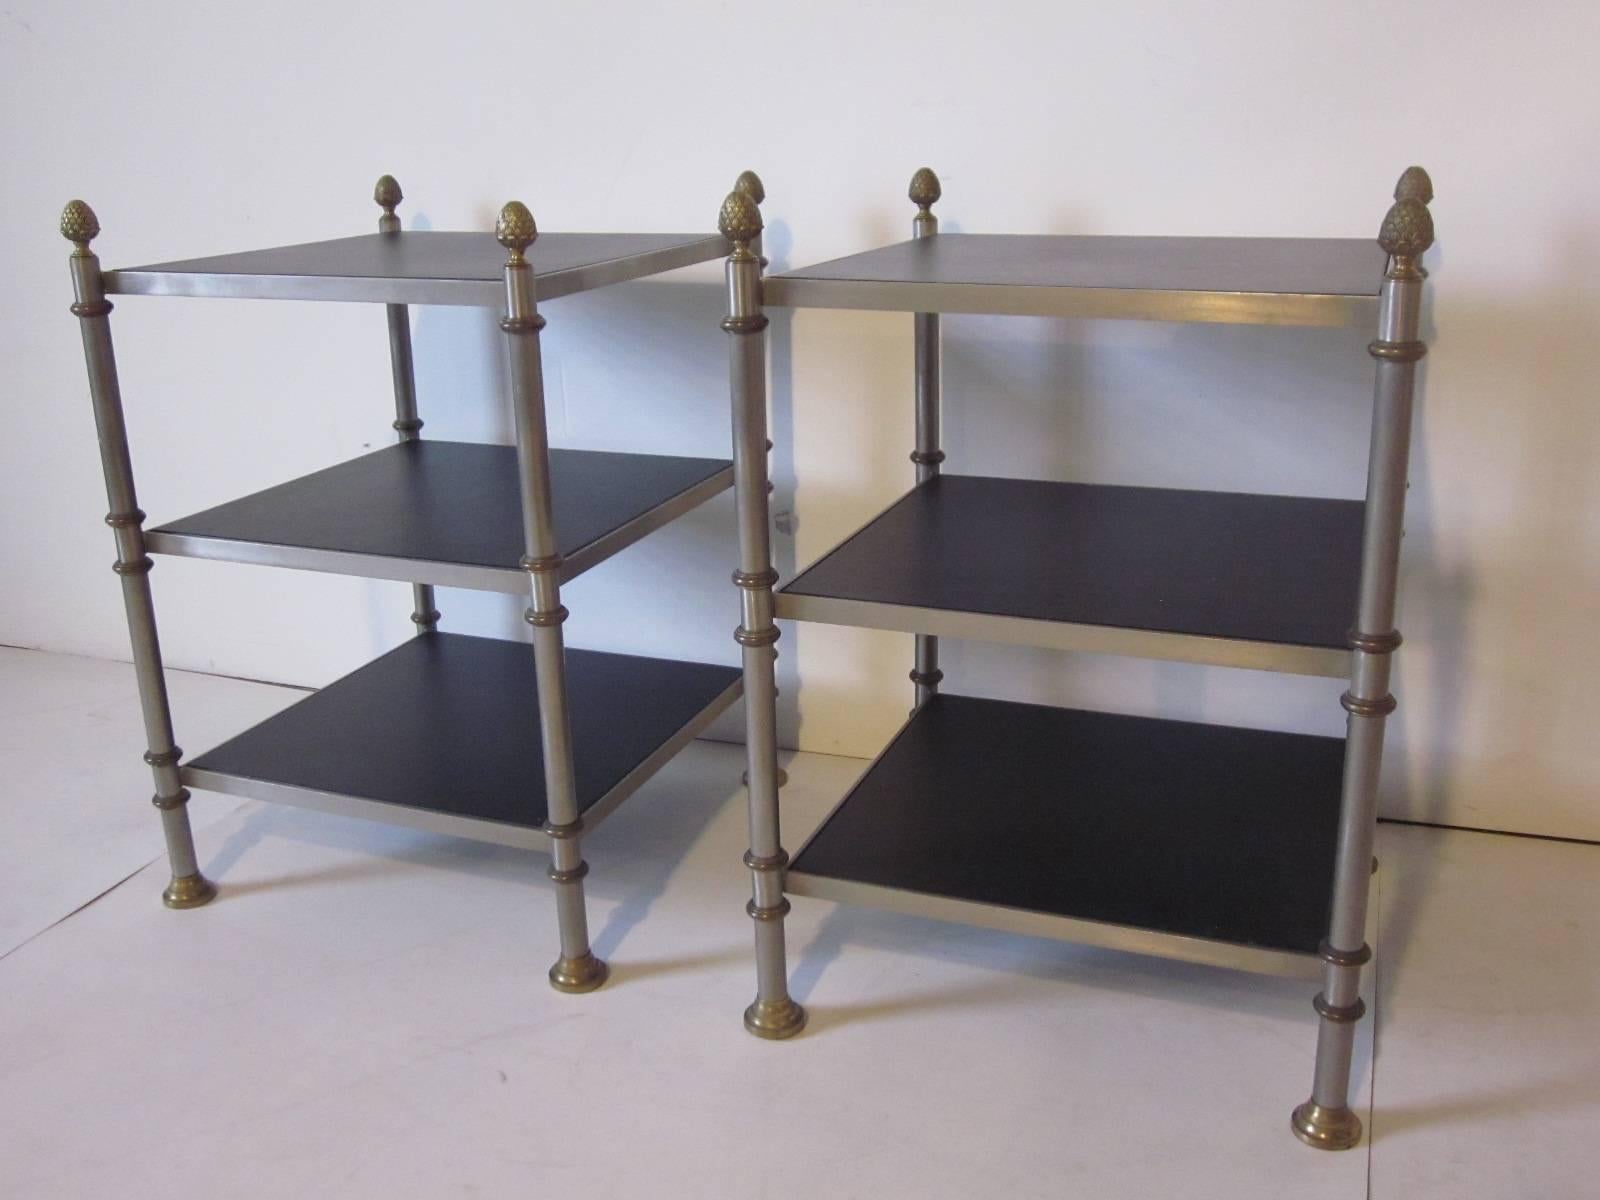 A pair of steel and brass nightstands or end tables with three leatherette covered wood shelves after Maison Jansen and marked made in Italy.